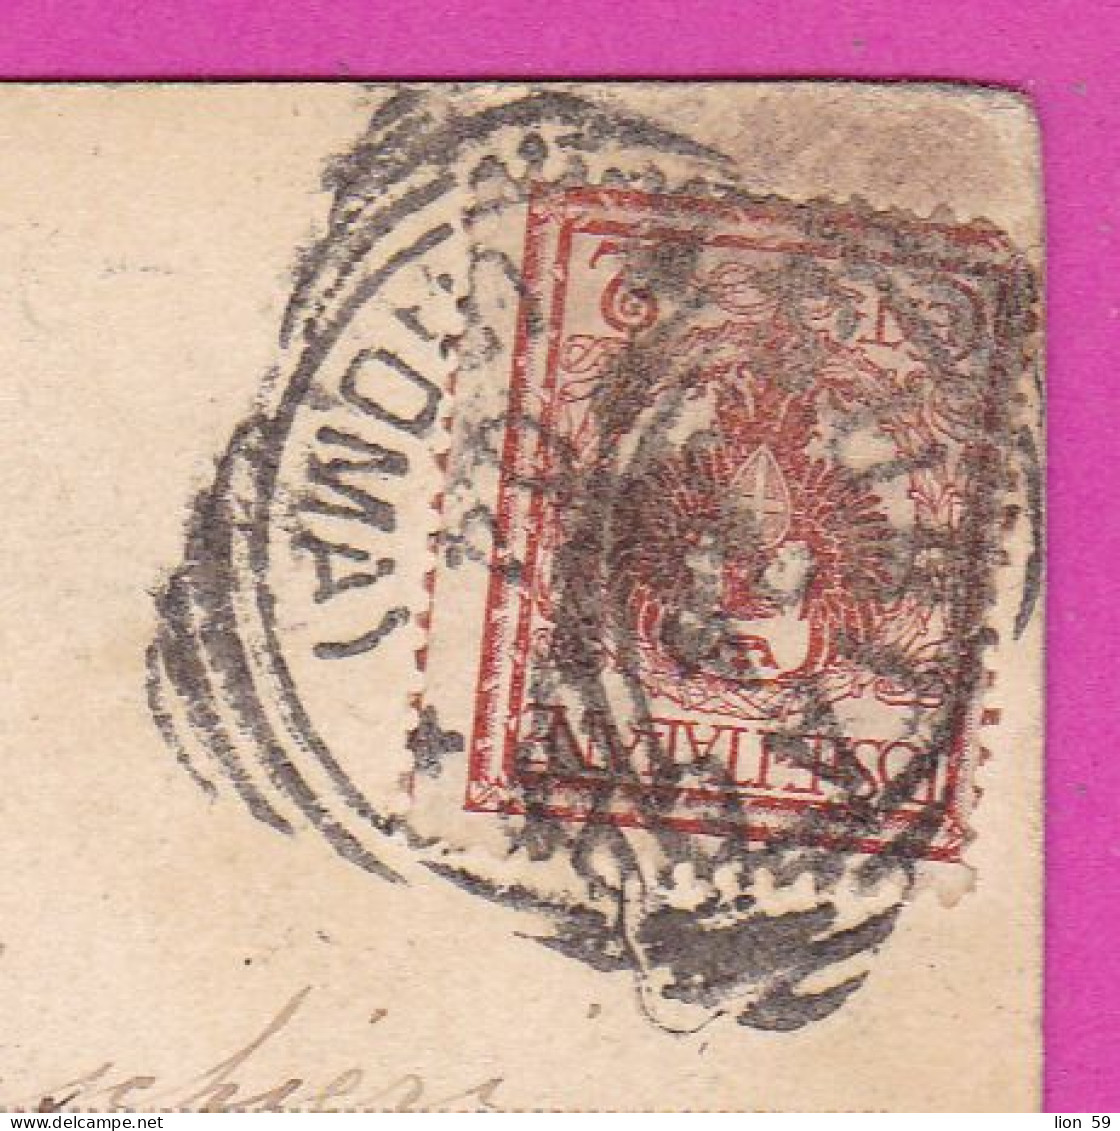 294074 / Italy - SUBIACO Interno Del 3 Chiostro ( XII Secolo)  PC 1904 USED - 2 Cent Eagle With Coat Of Arms - Poststempel